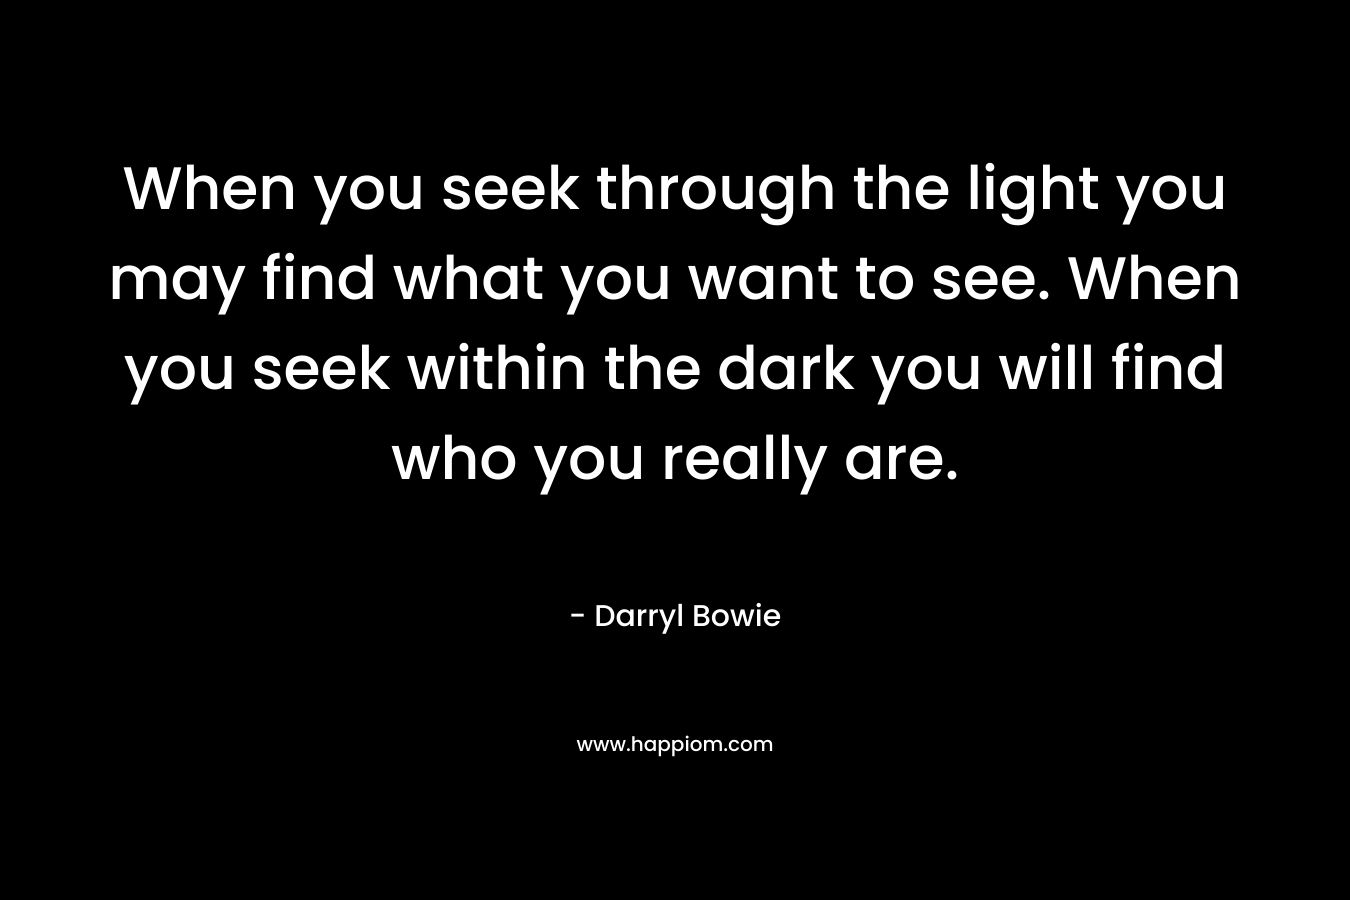 When you seek through the light you may find what you want to see. When you seek within the dark you will find who you really are.